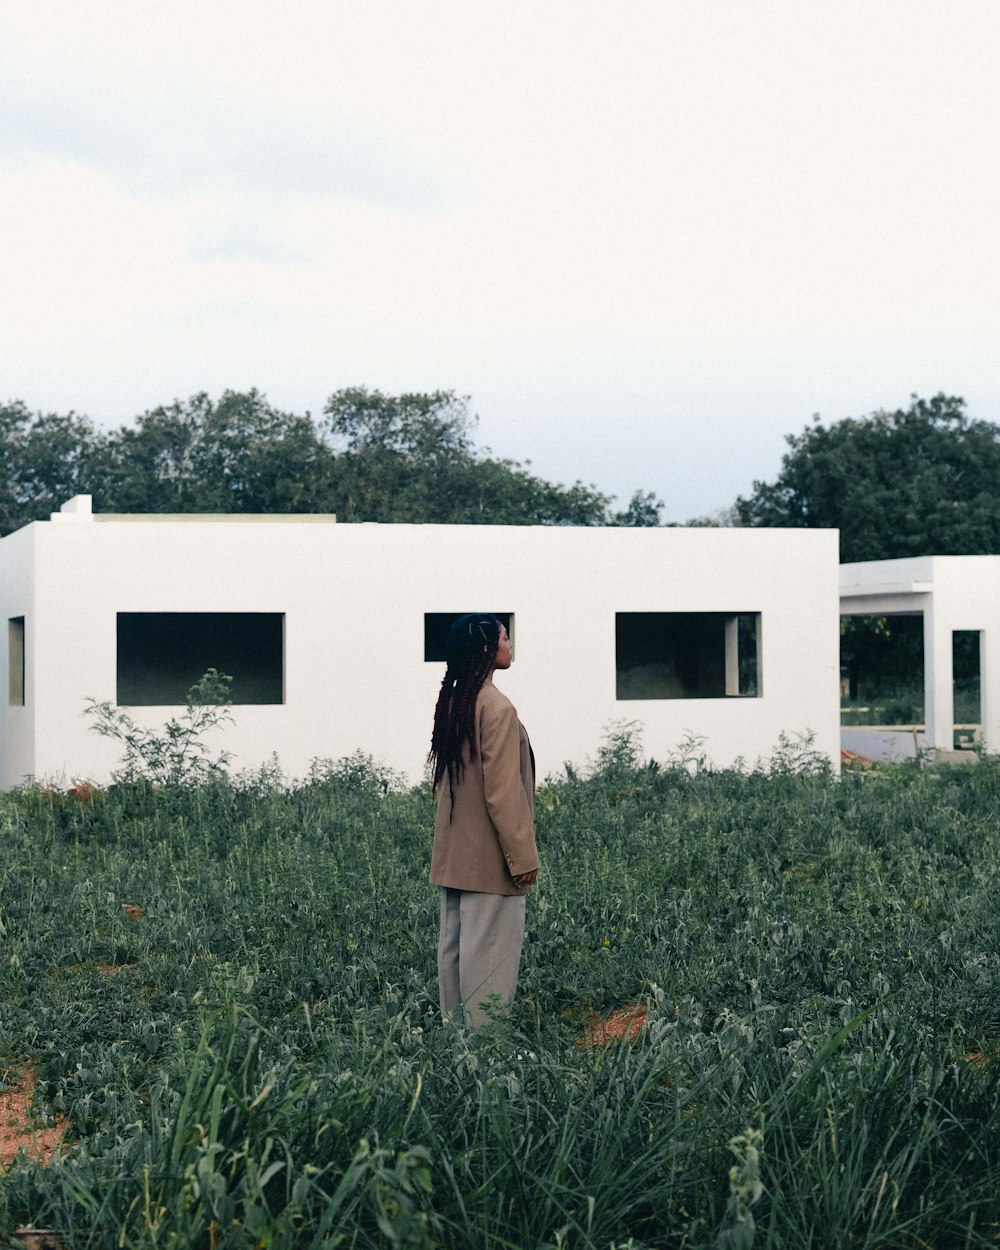 a person standing in a field with a house in the background